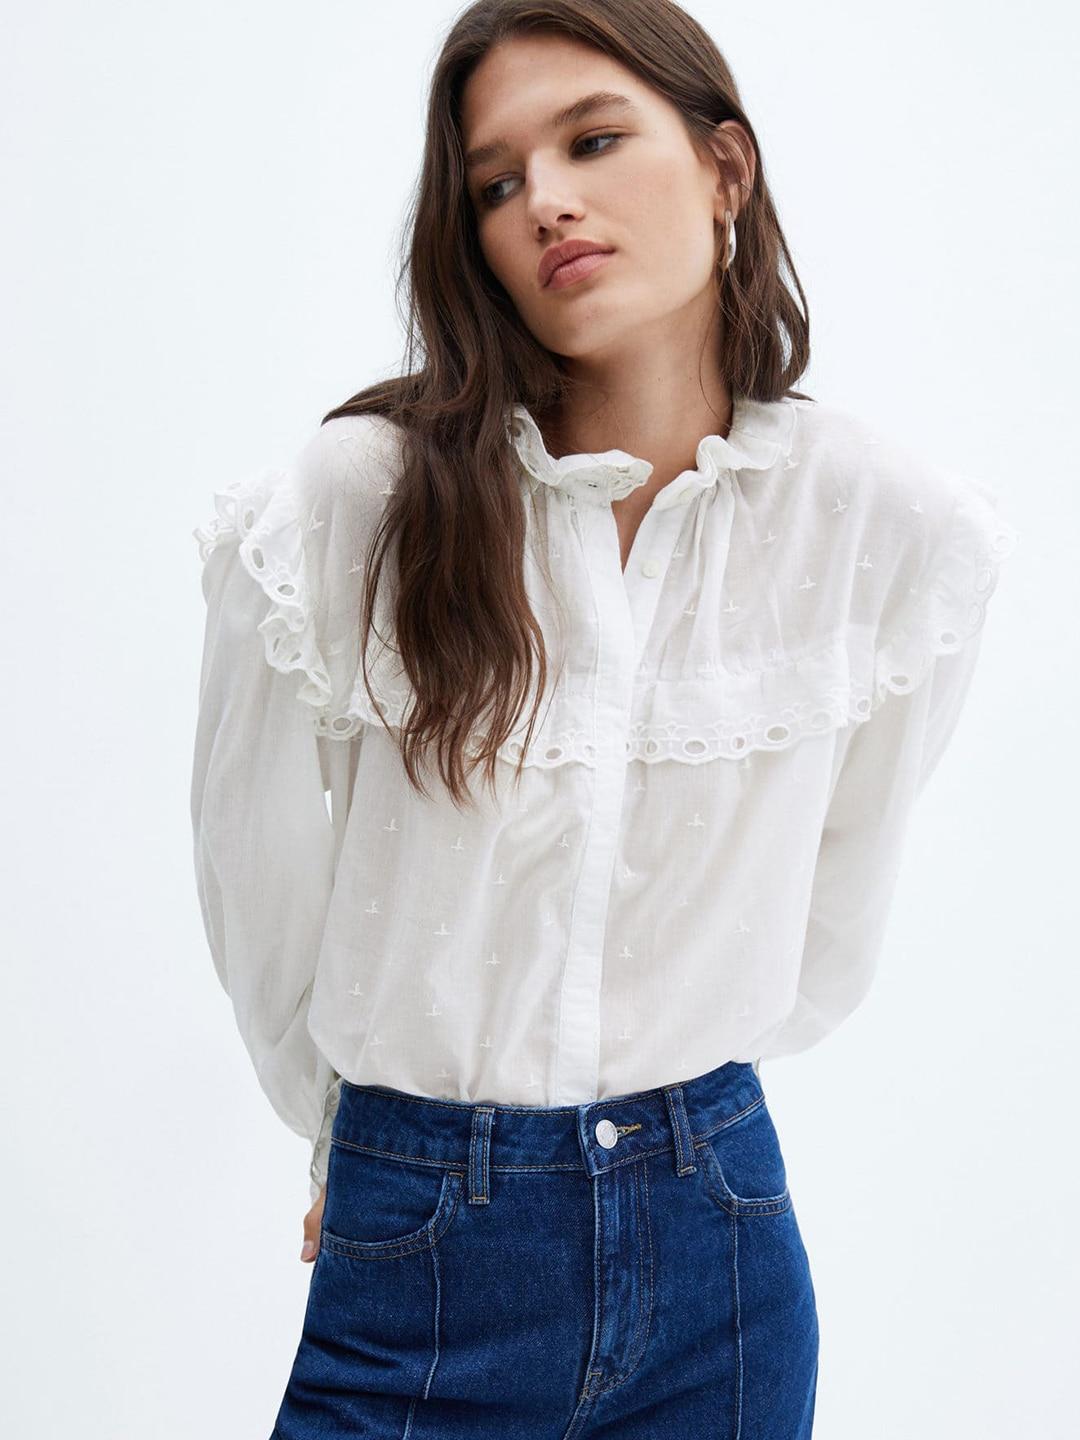 mango embroidered puff sleeve ruffled pure cotton shirt style top